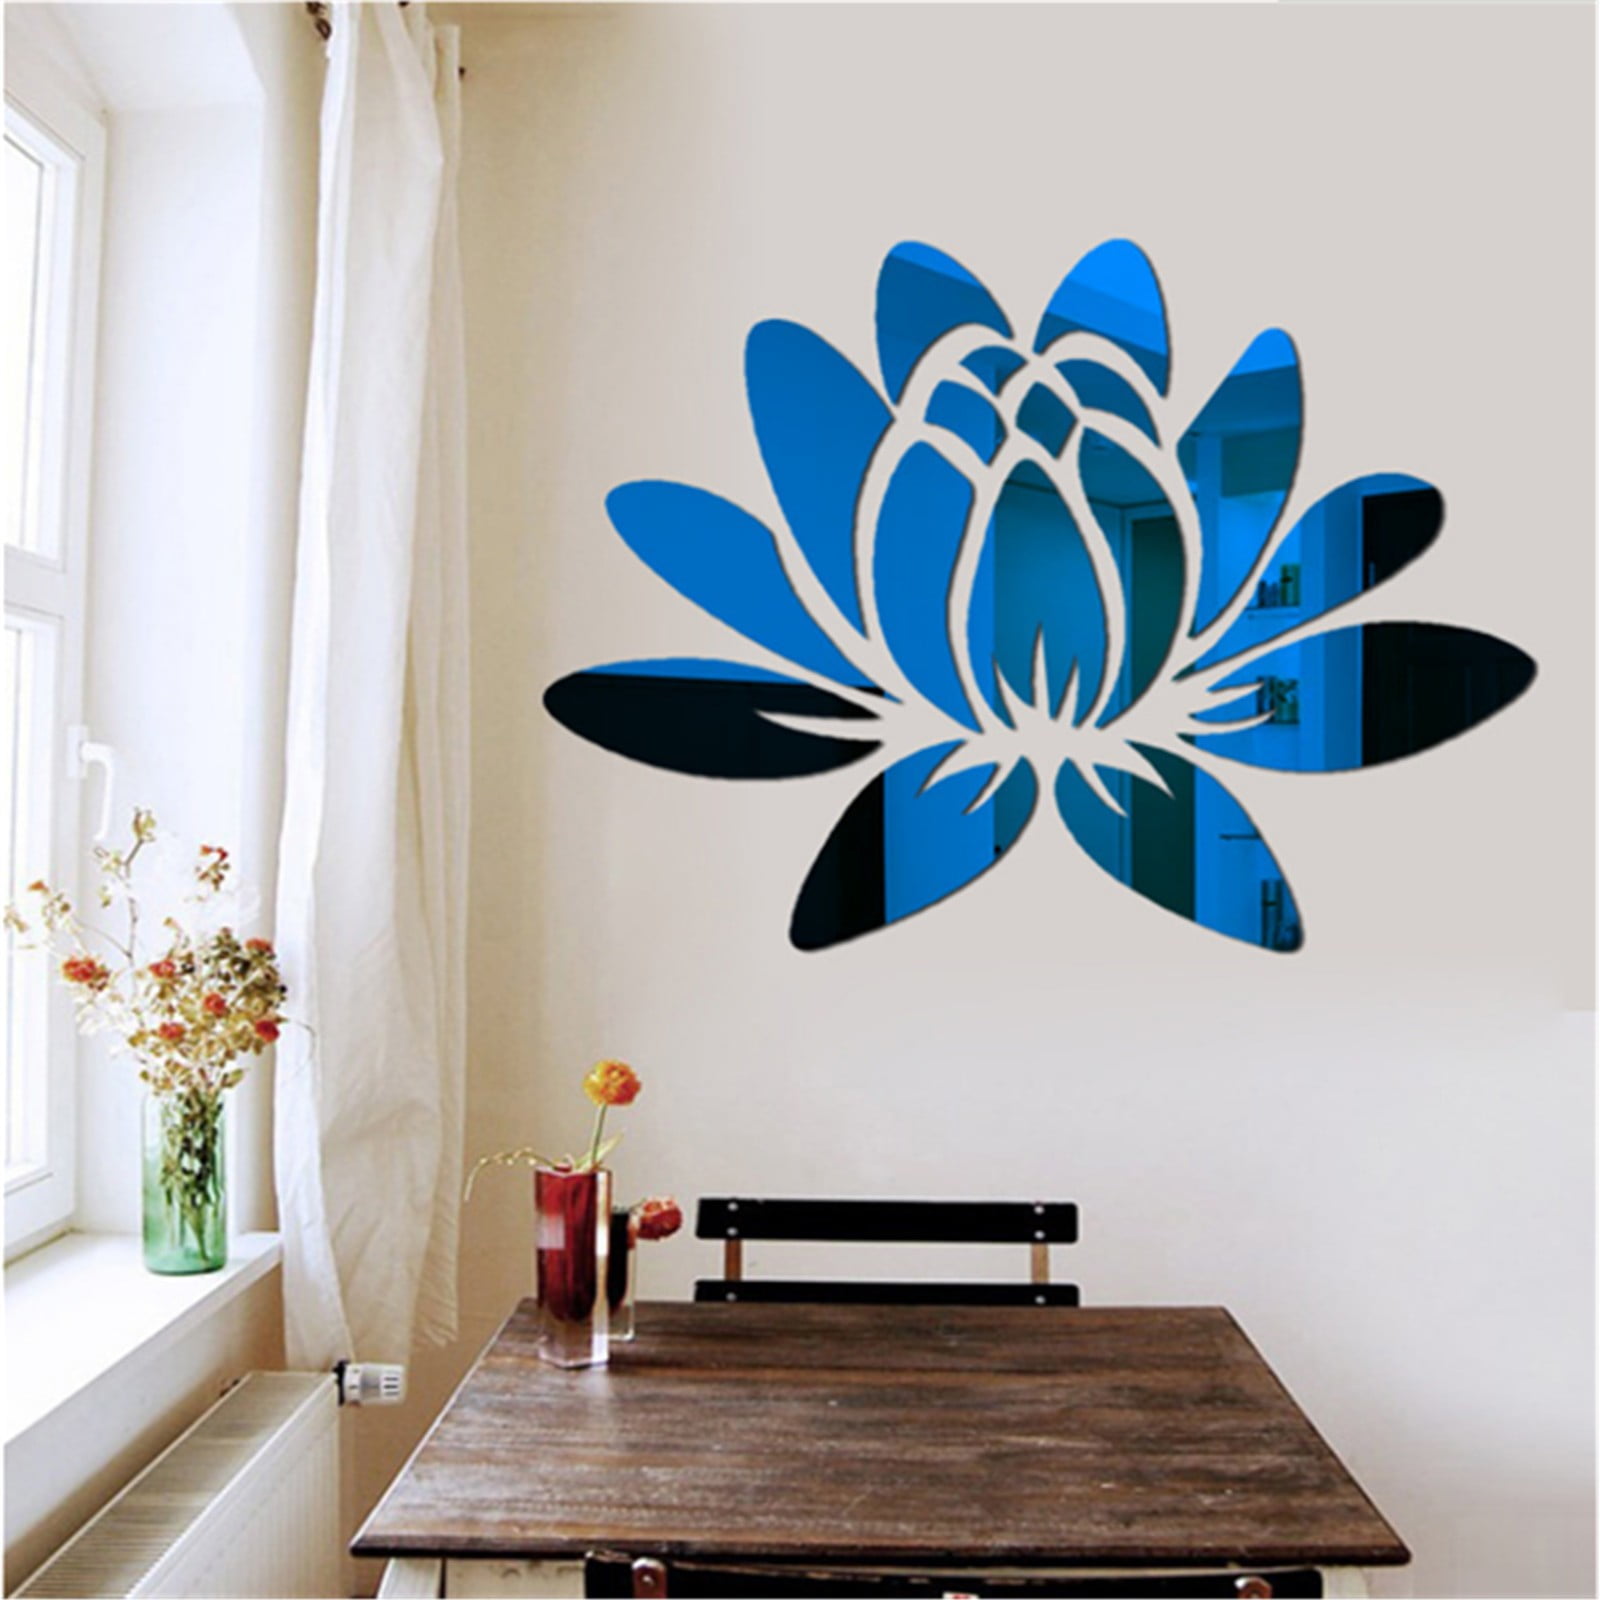 Details about   Acrylic Photo Frame Flower Design Wall Mirror Art Stickers Home Decoration Craft 